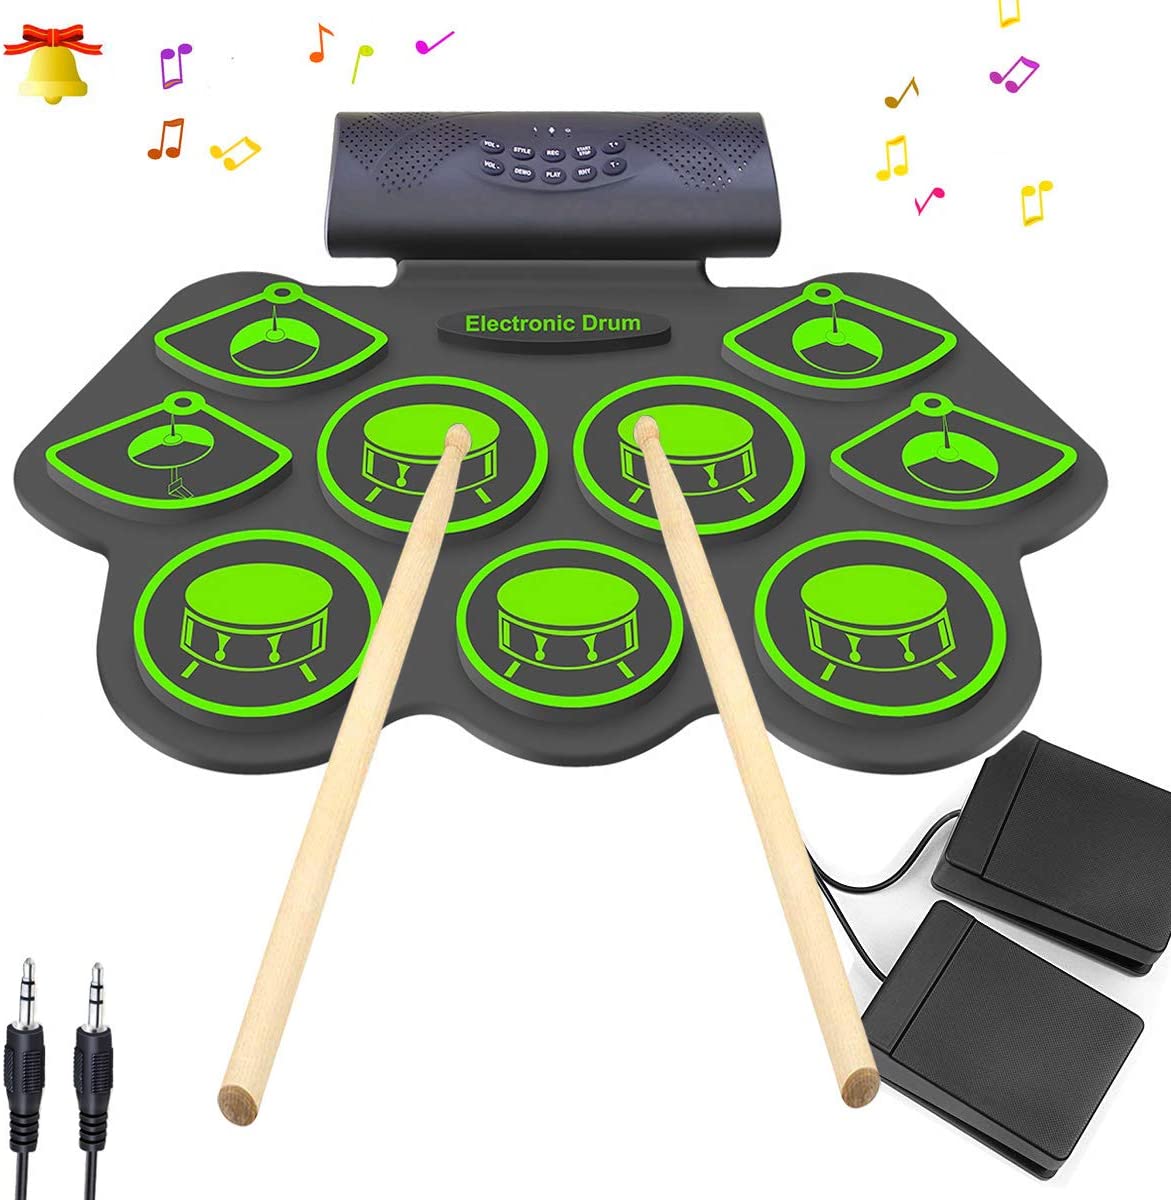 Electronic Drum Set - Top Toys and Gifts for Nine Year Old Boys 1